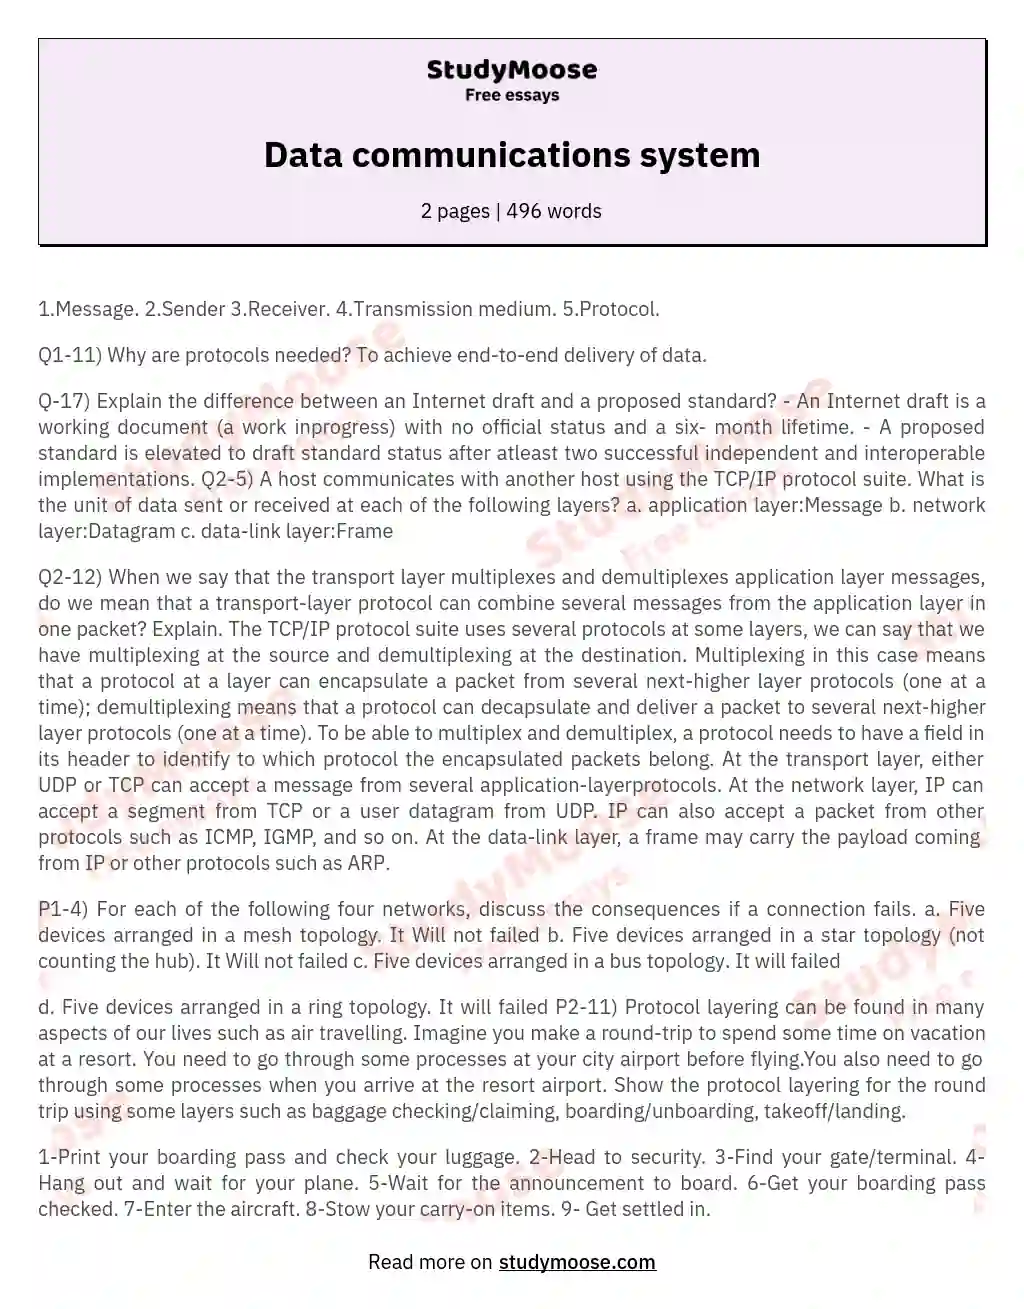 essay on communication systems